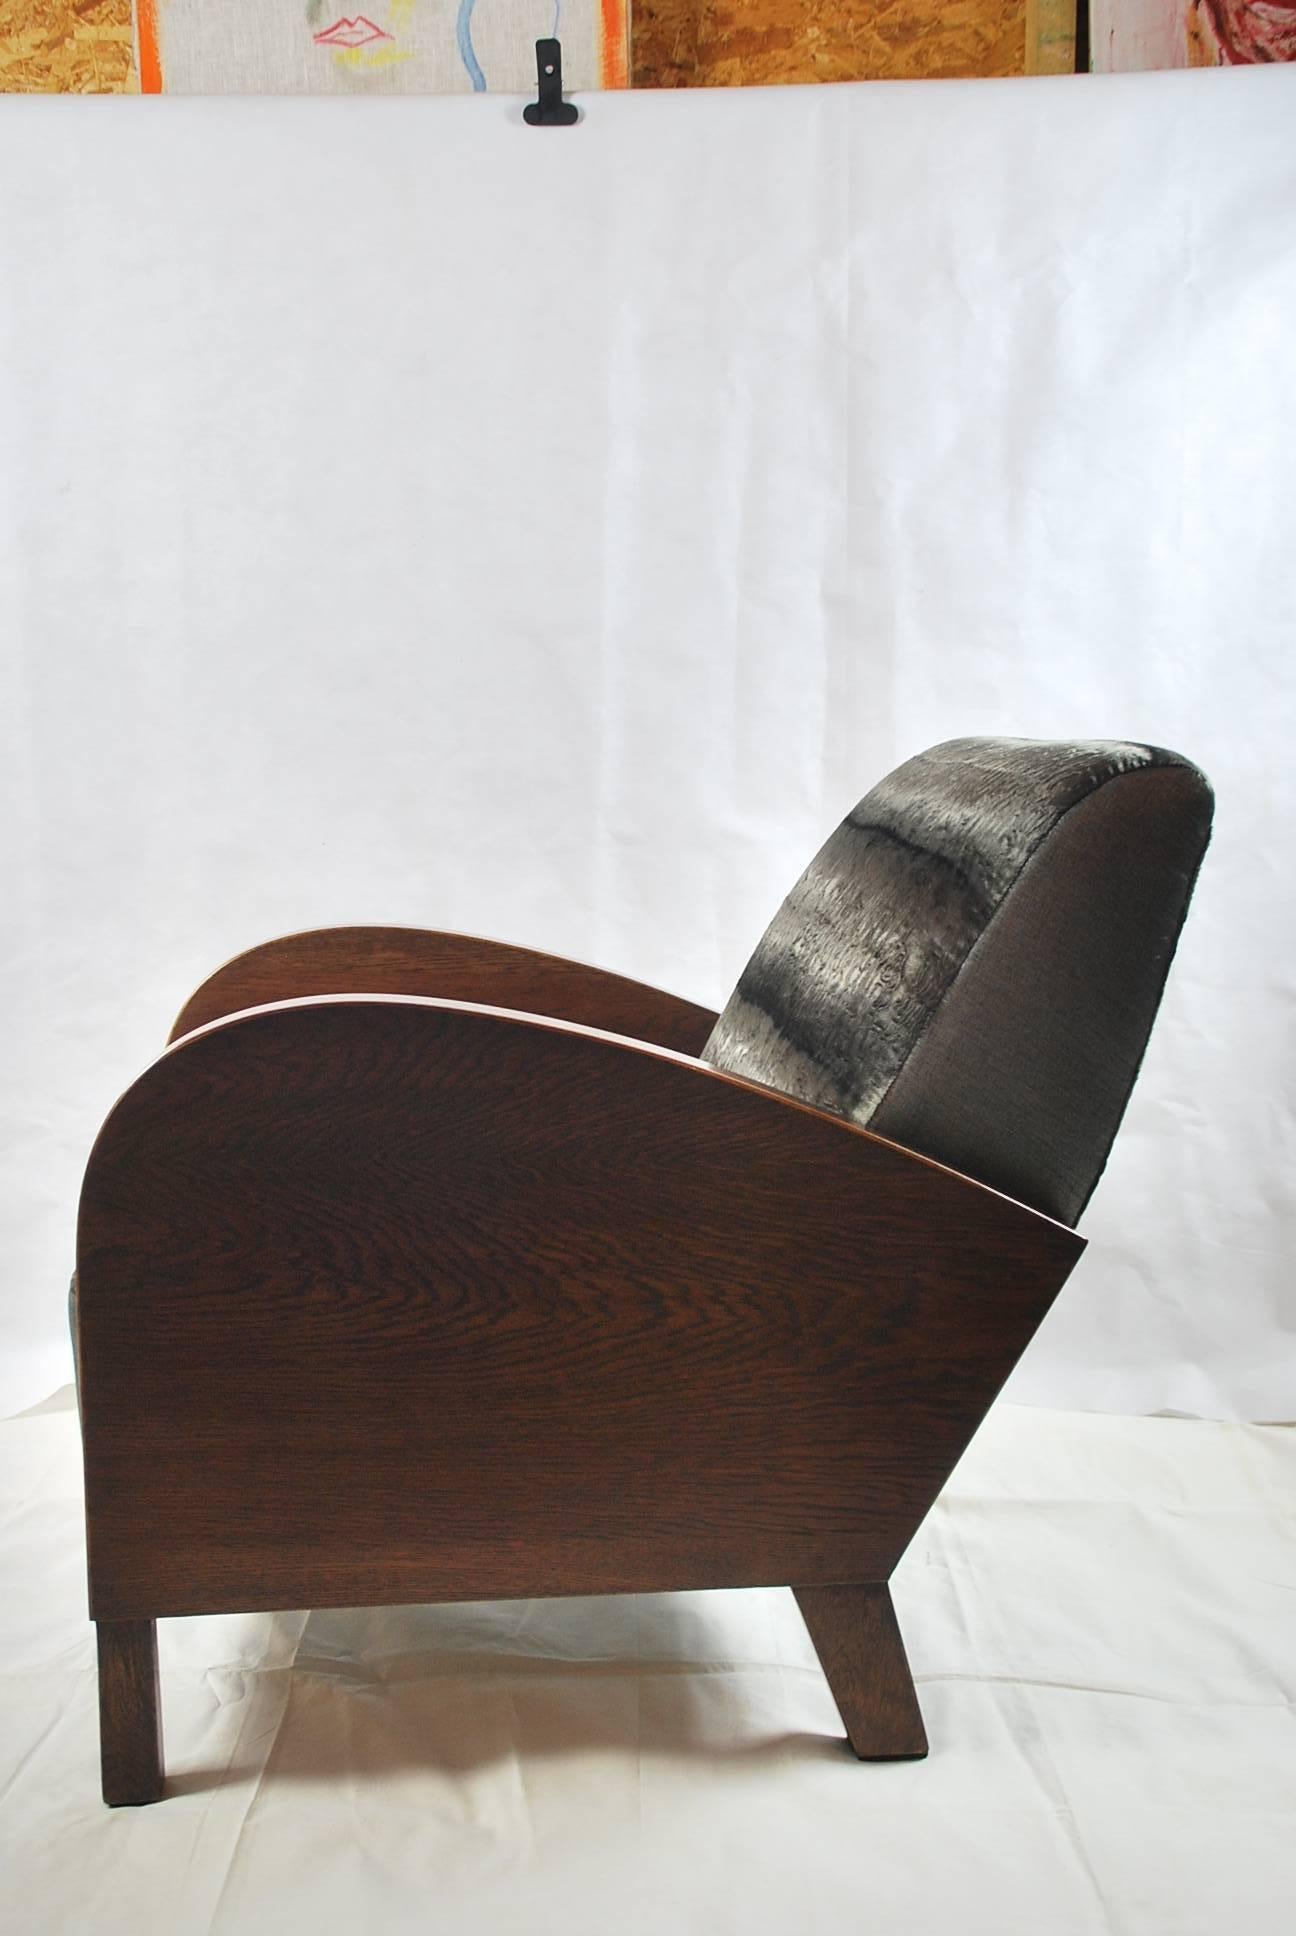 Custom-Made circa 1950s for Director of One of the Olomouc Company, Czech For Sale 2